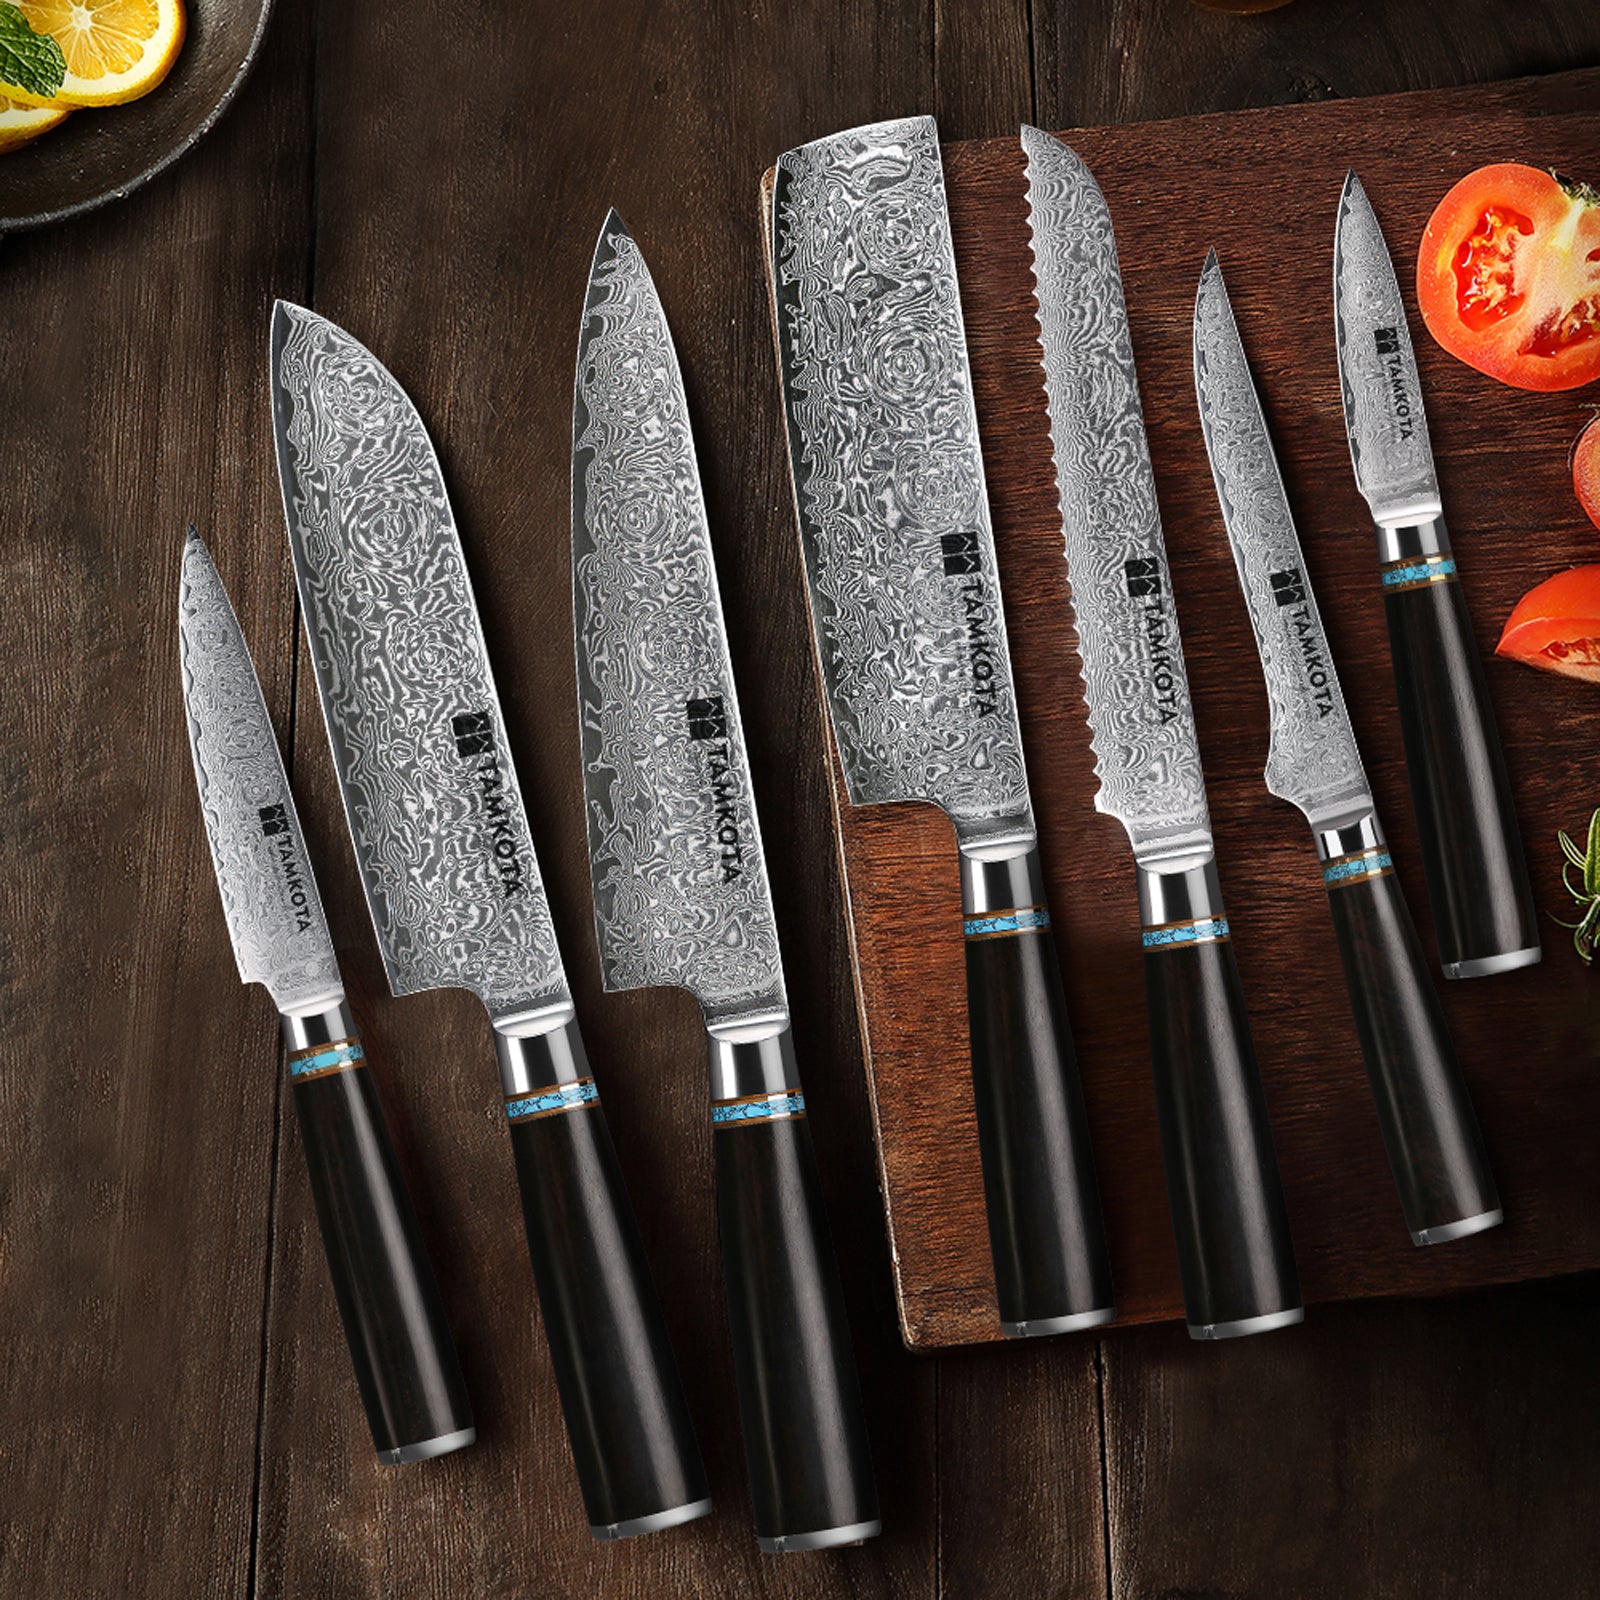 These knives are lightweight, incredibly sharp and they offer excellent performance for the money.